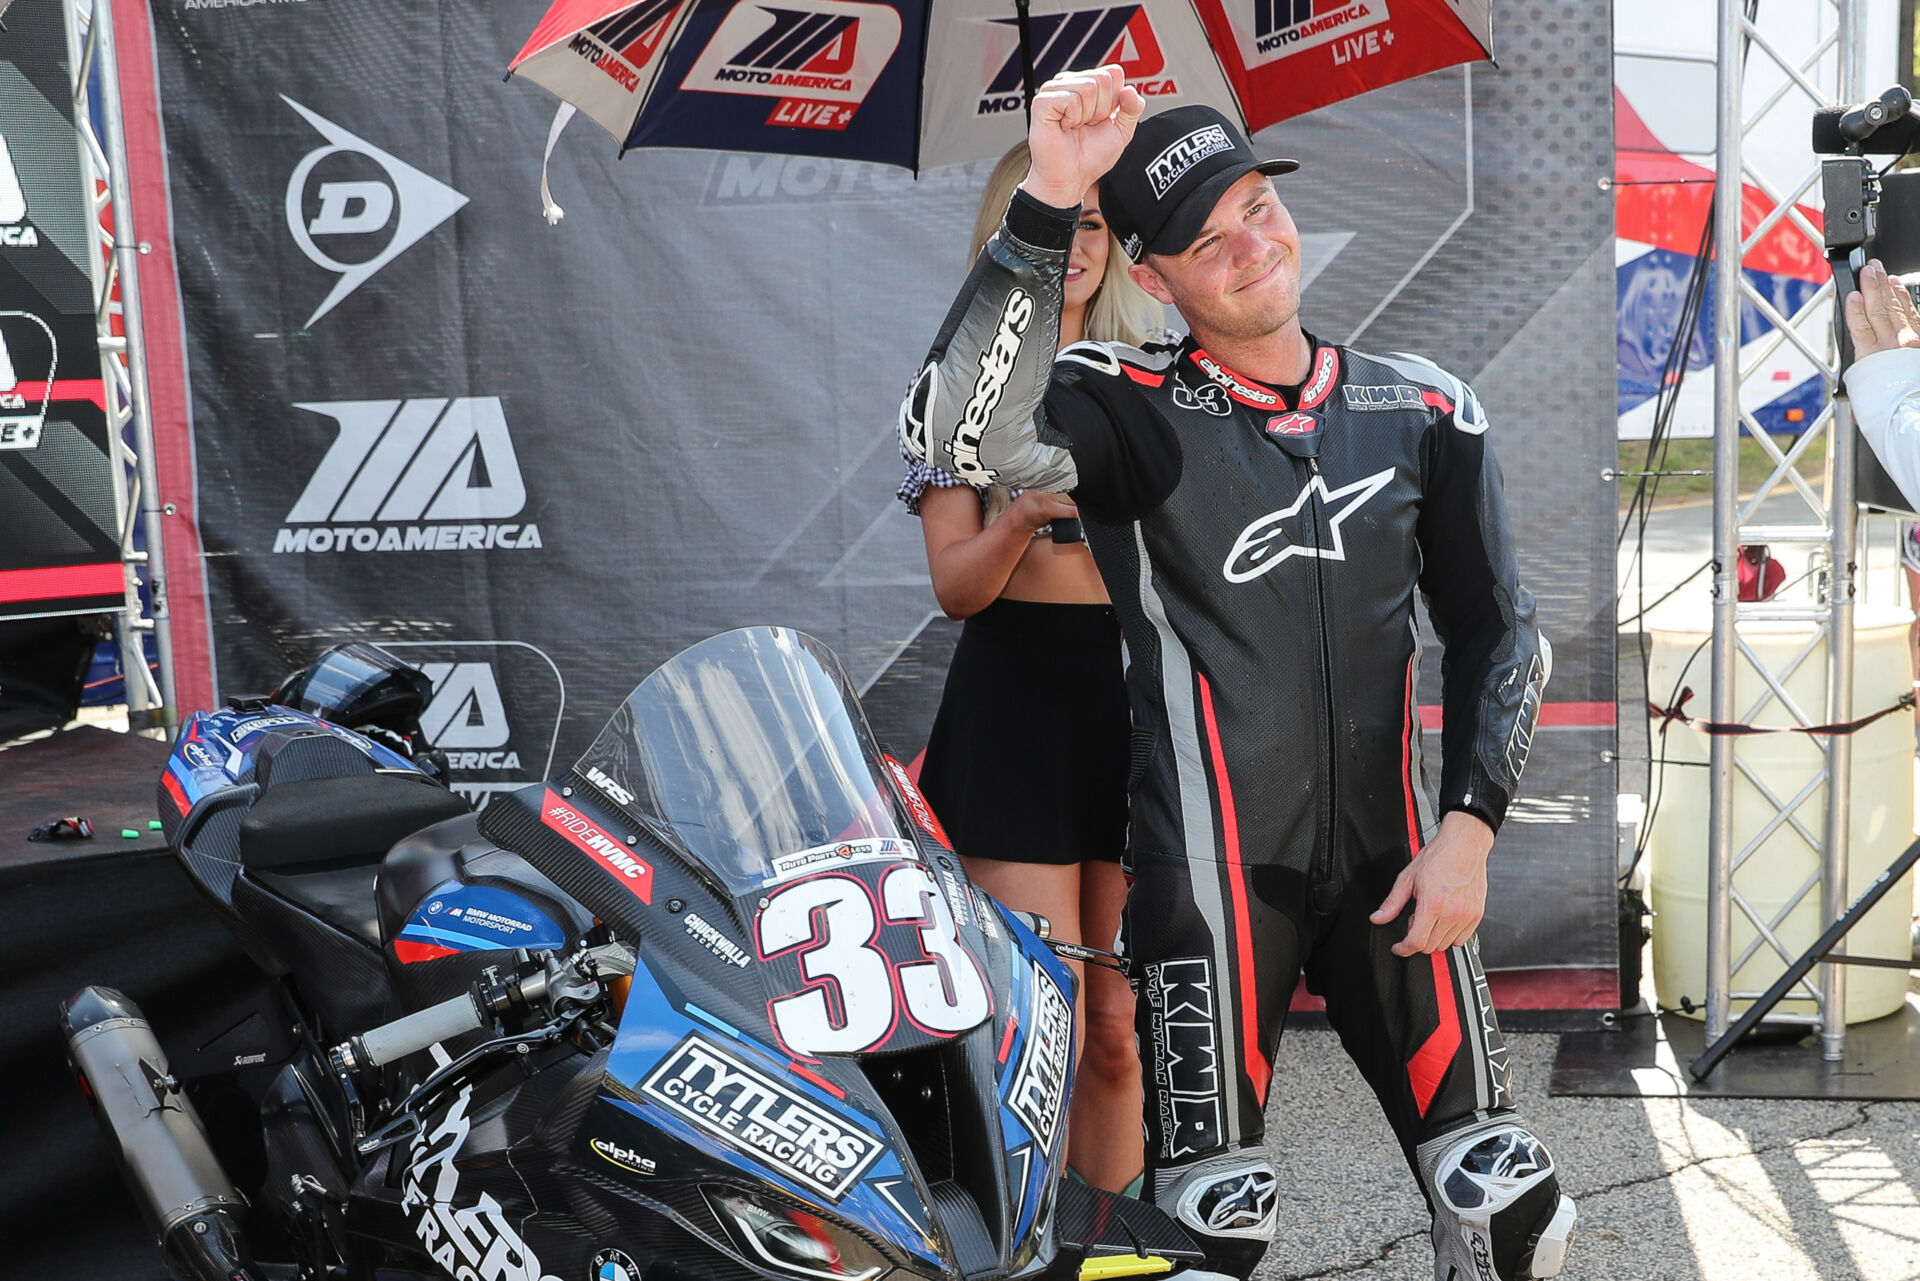 Kyle Wyman on the podium following Superbike Race Two at Road Atlanta. Photo by Brian J. Nelson, courtesy Tytlers Cycle Racing.